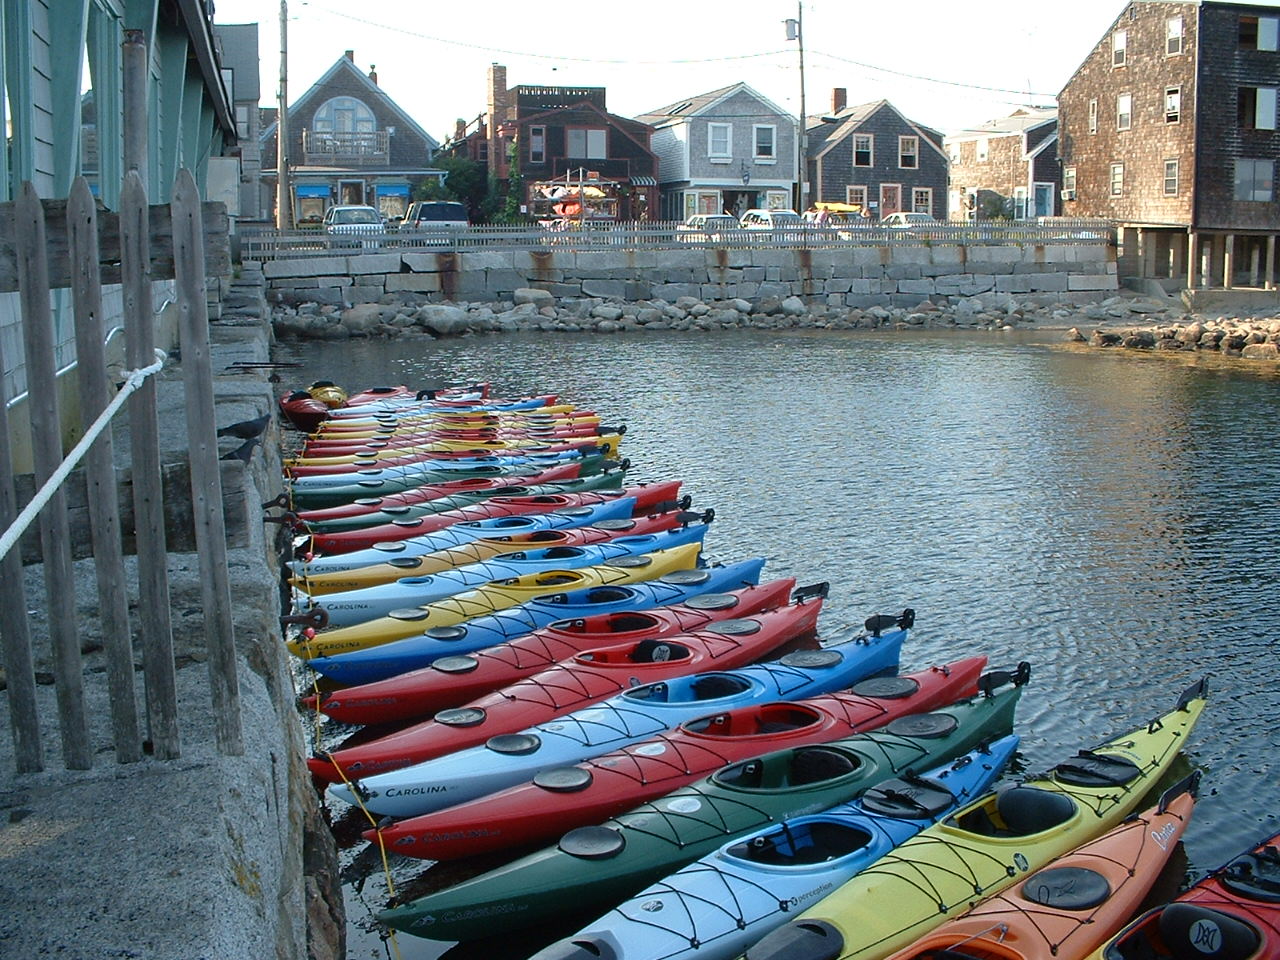 Kayaks for Rent (user submitted)